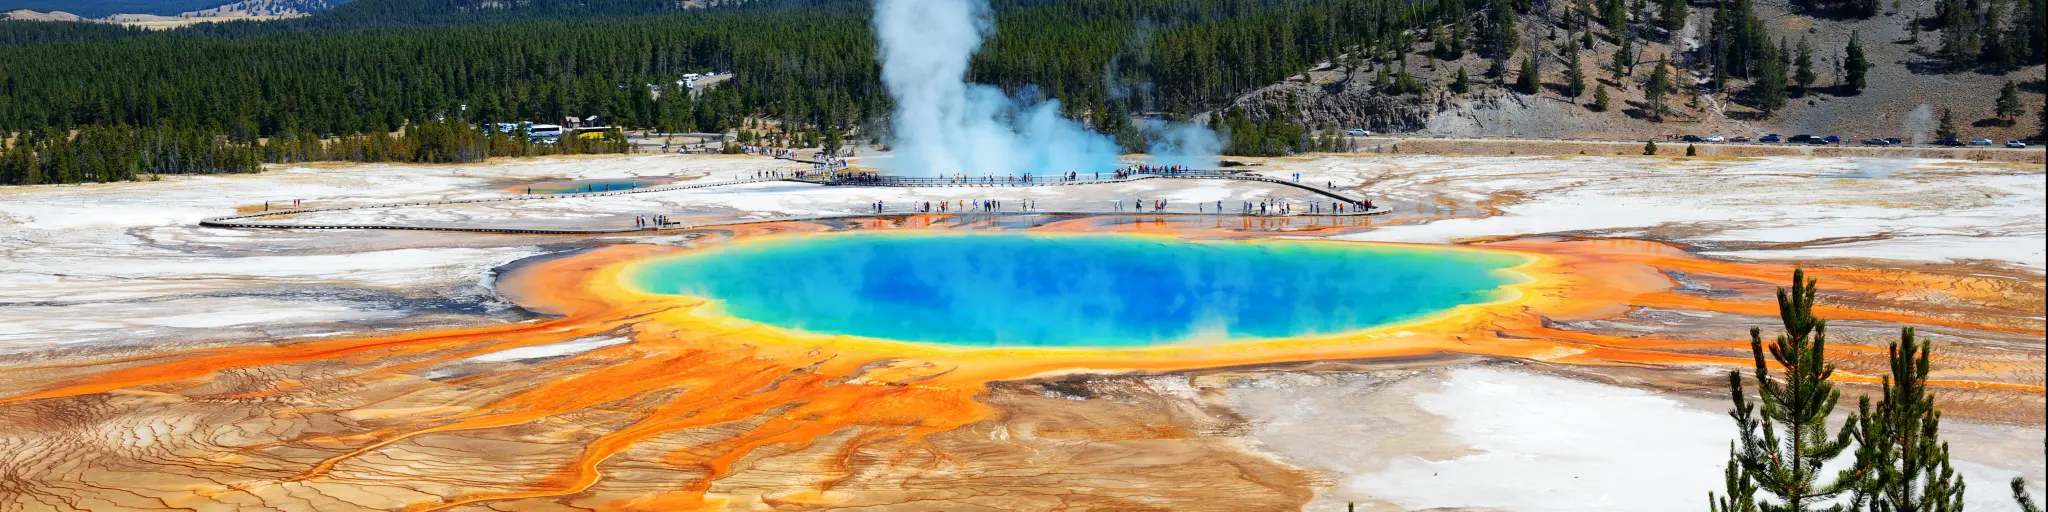 Famous trail of Grand Prismatic Springs in Yellowstone National Park from high angle view. Beautiful hot springs with vivid color blue green orange in Wyoming.